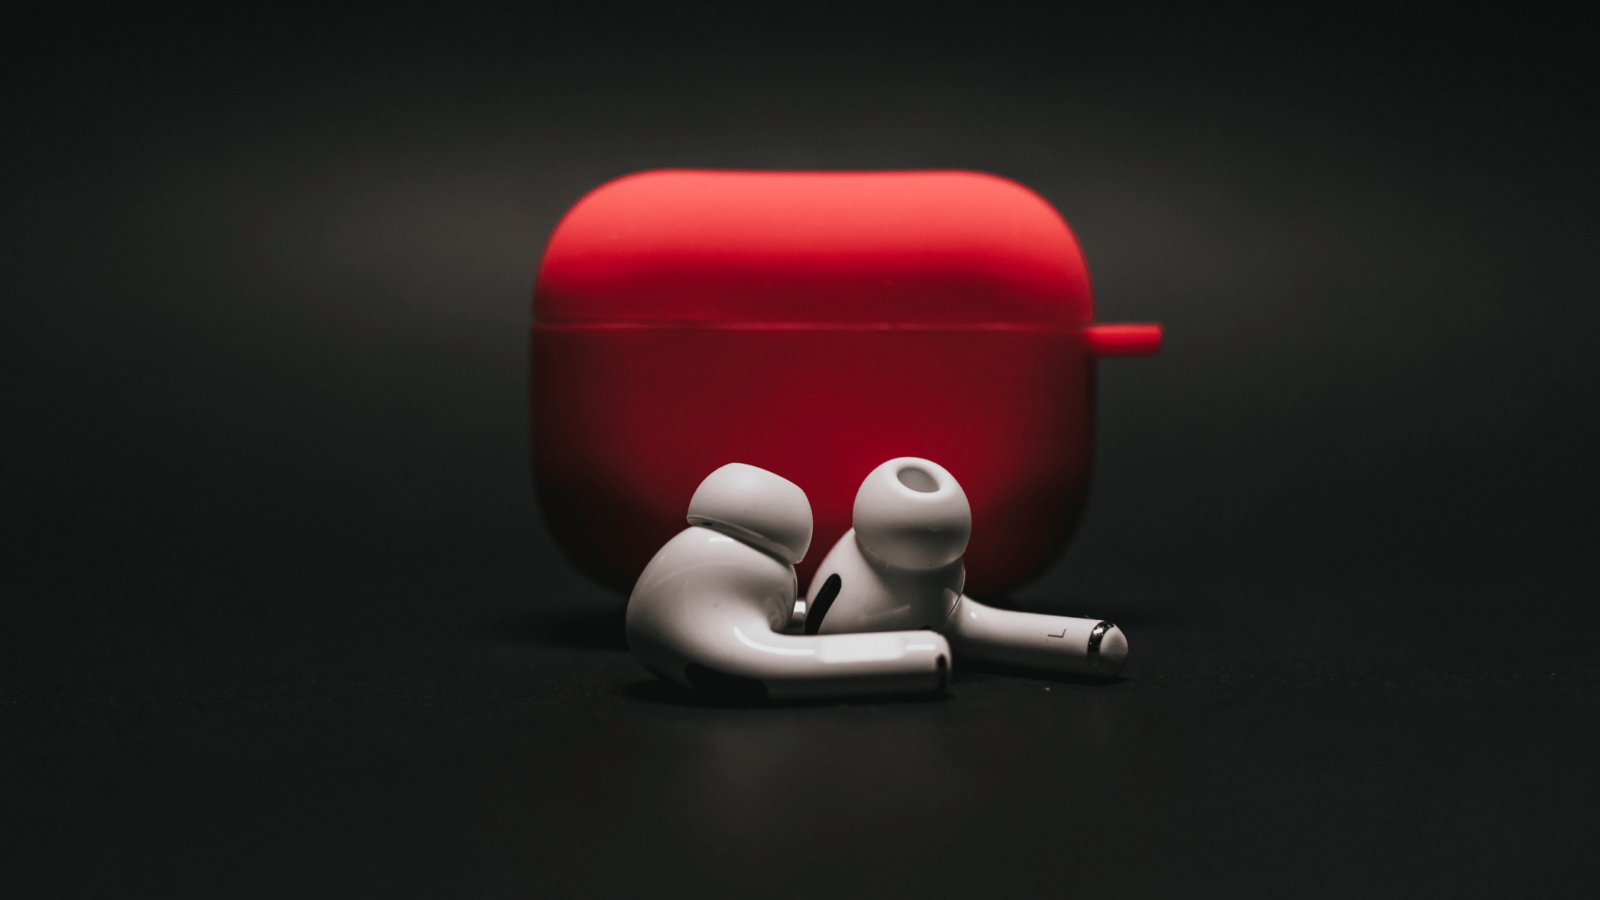 are airpods case covers worth it? image of a red case cover for Airpods on a black background